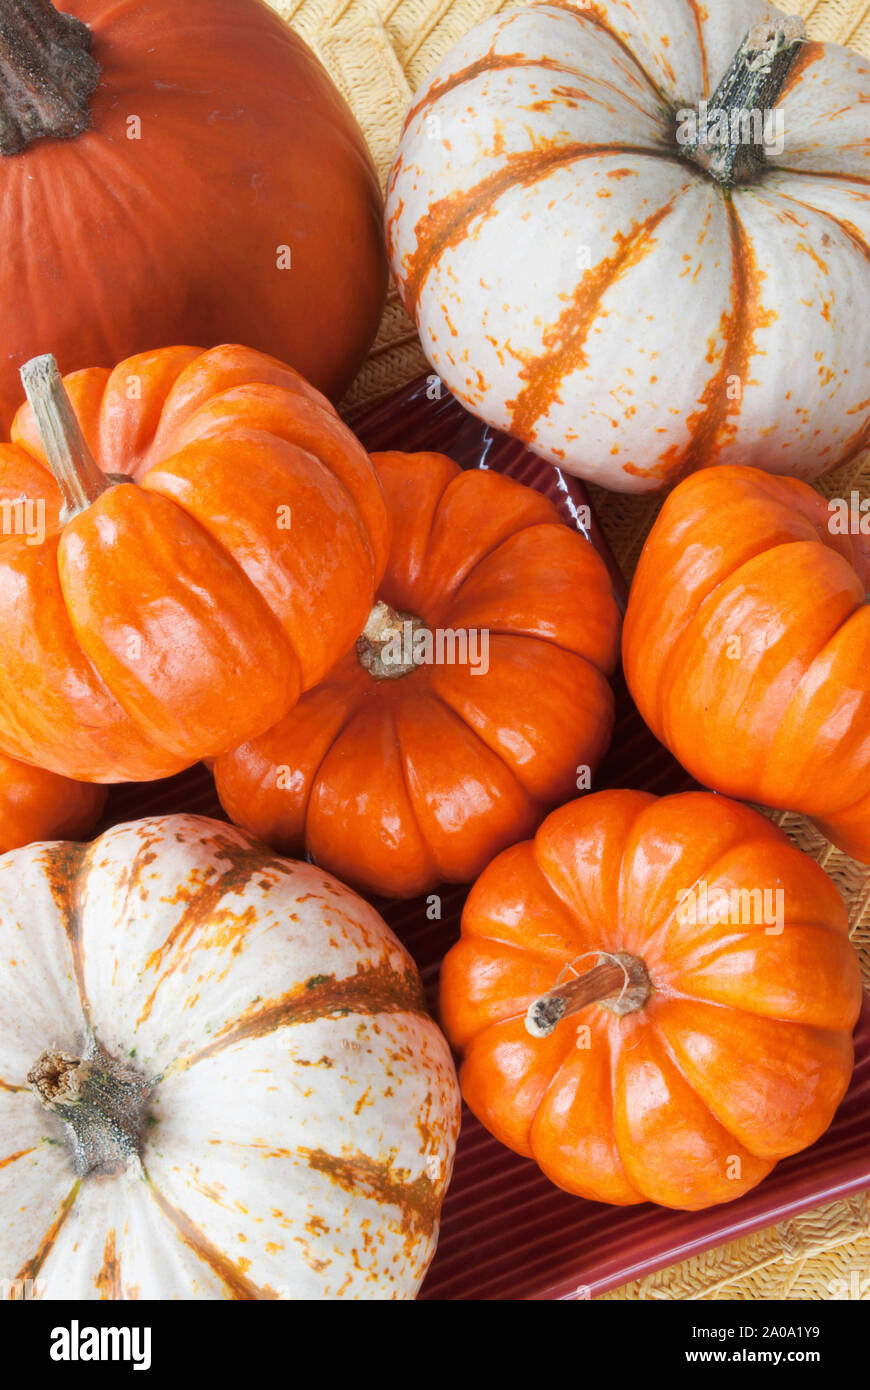 Directly above shot of an assortment of miniature whole pumpkins. Some are traditionally orange colored and some are white with stripes. Stock Photo